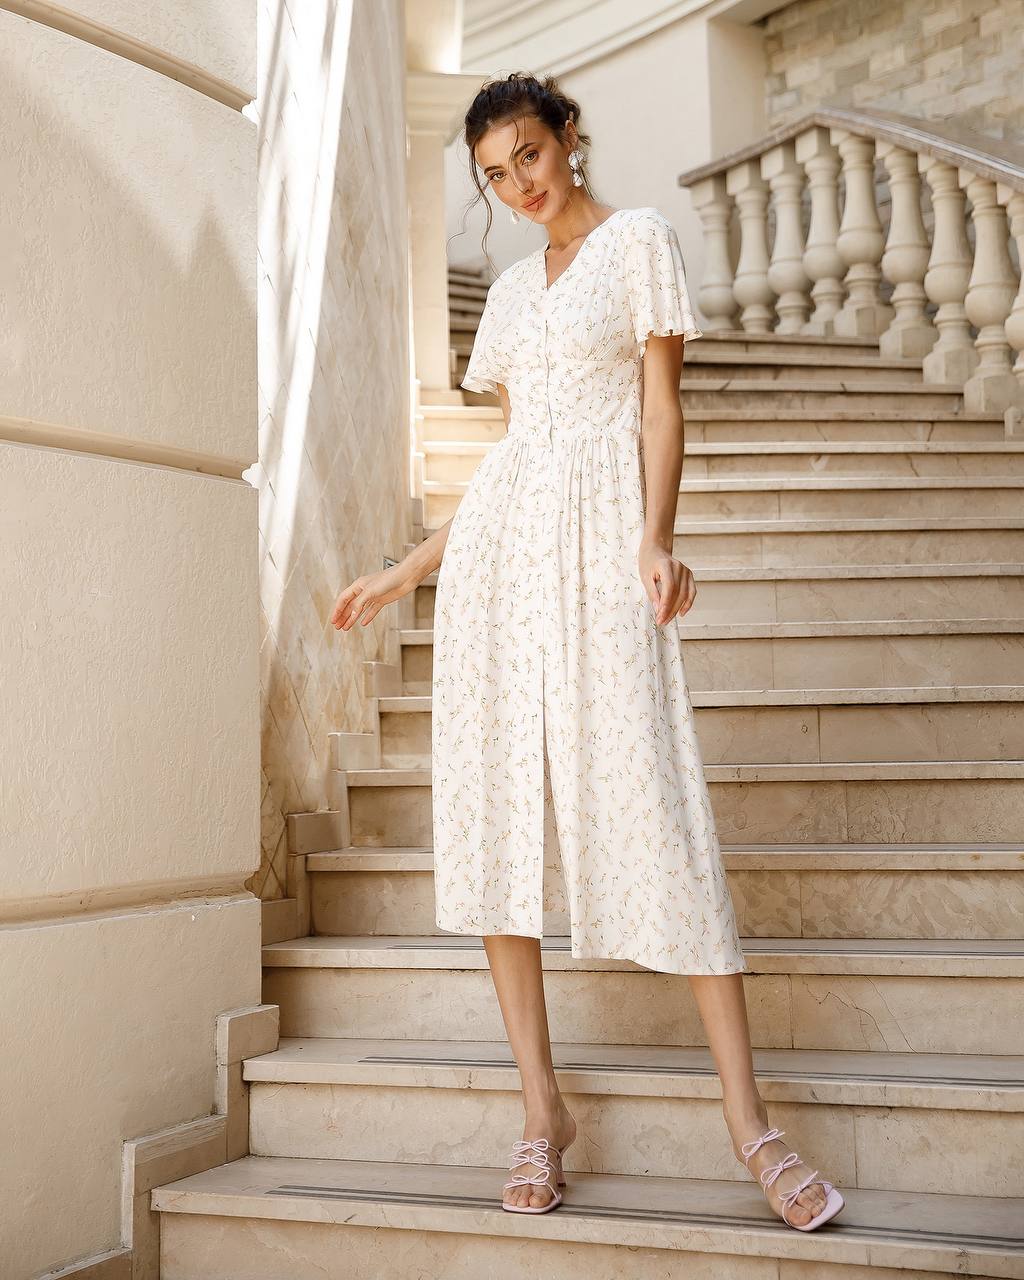 a woman in a white dress standing on a set of stairs